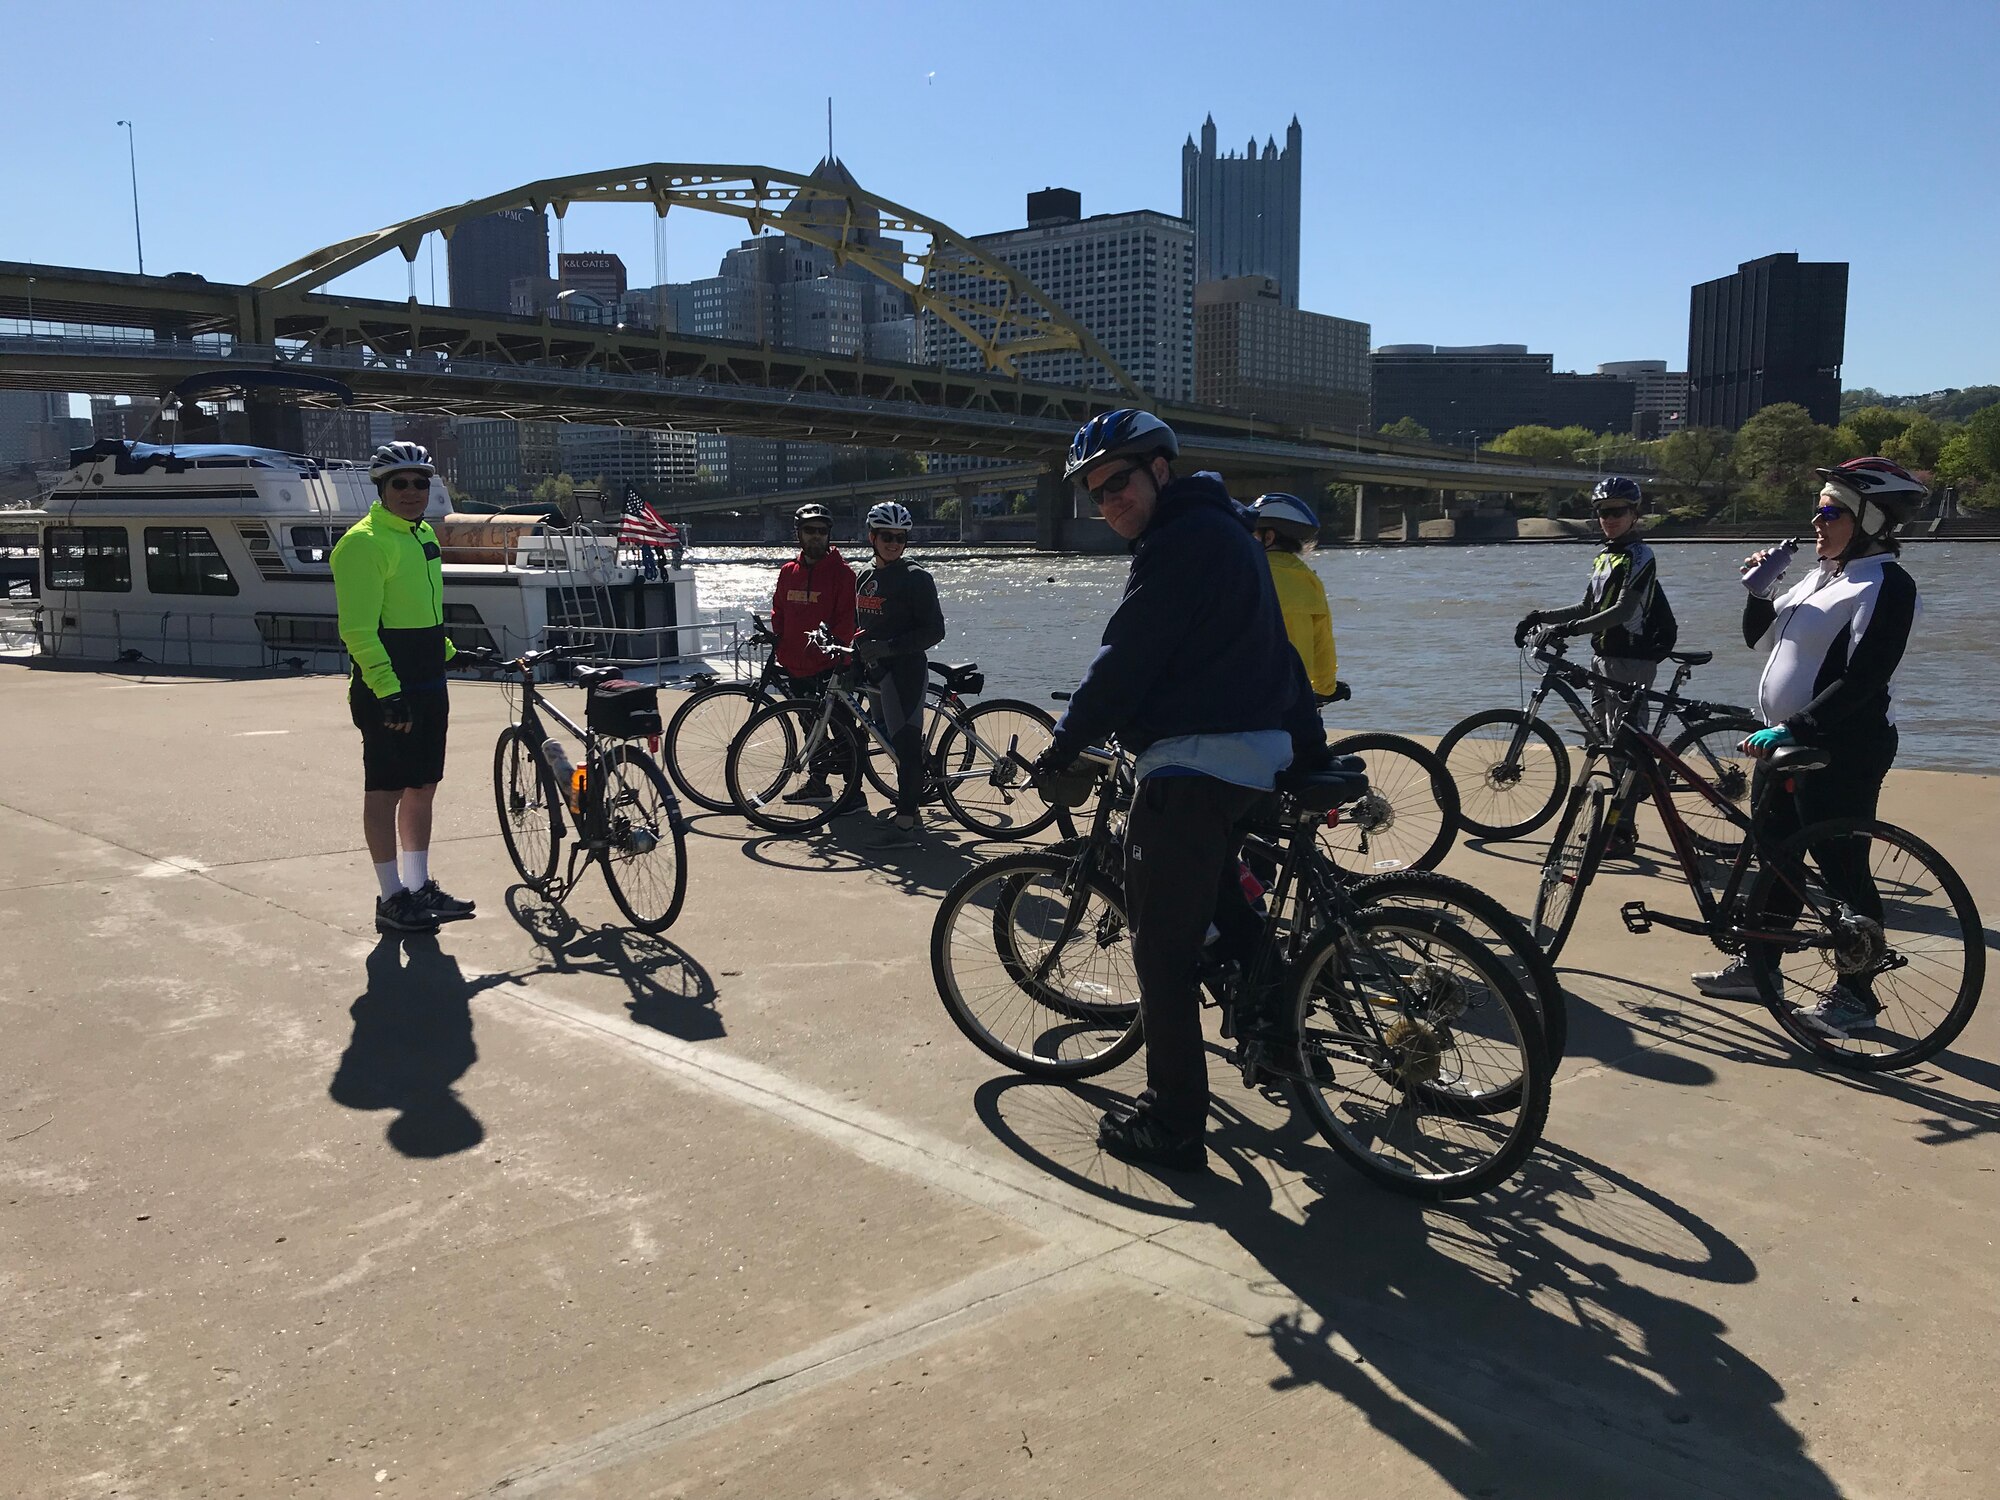 Veterans and military members take a break from riding bikes on the Riverfront Trail in Pittsburgh, Pennsylvania, April 27, 2019.